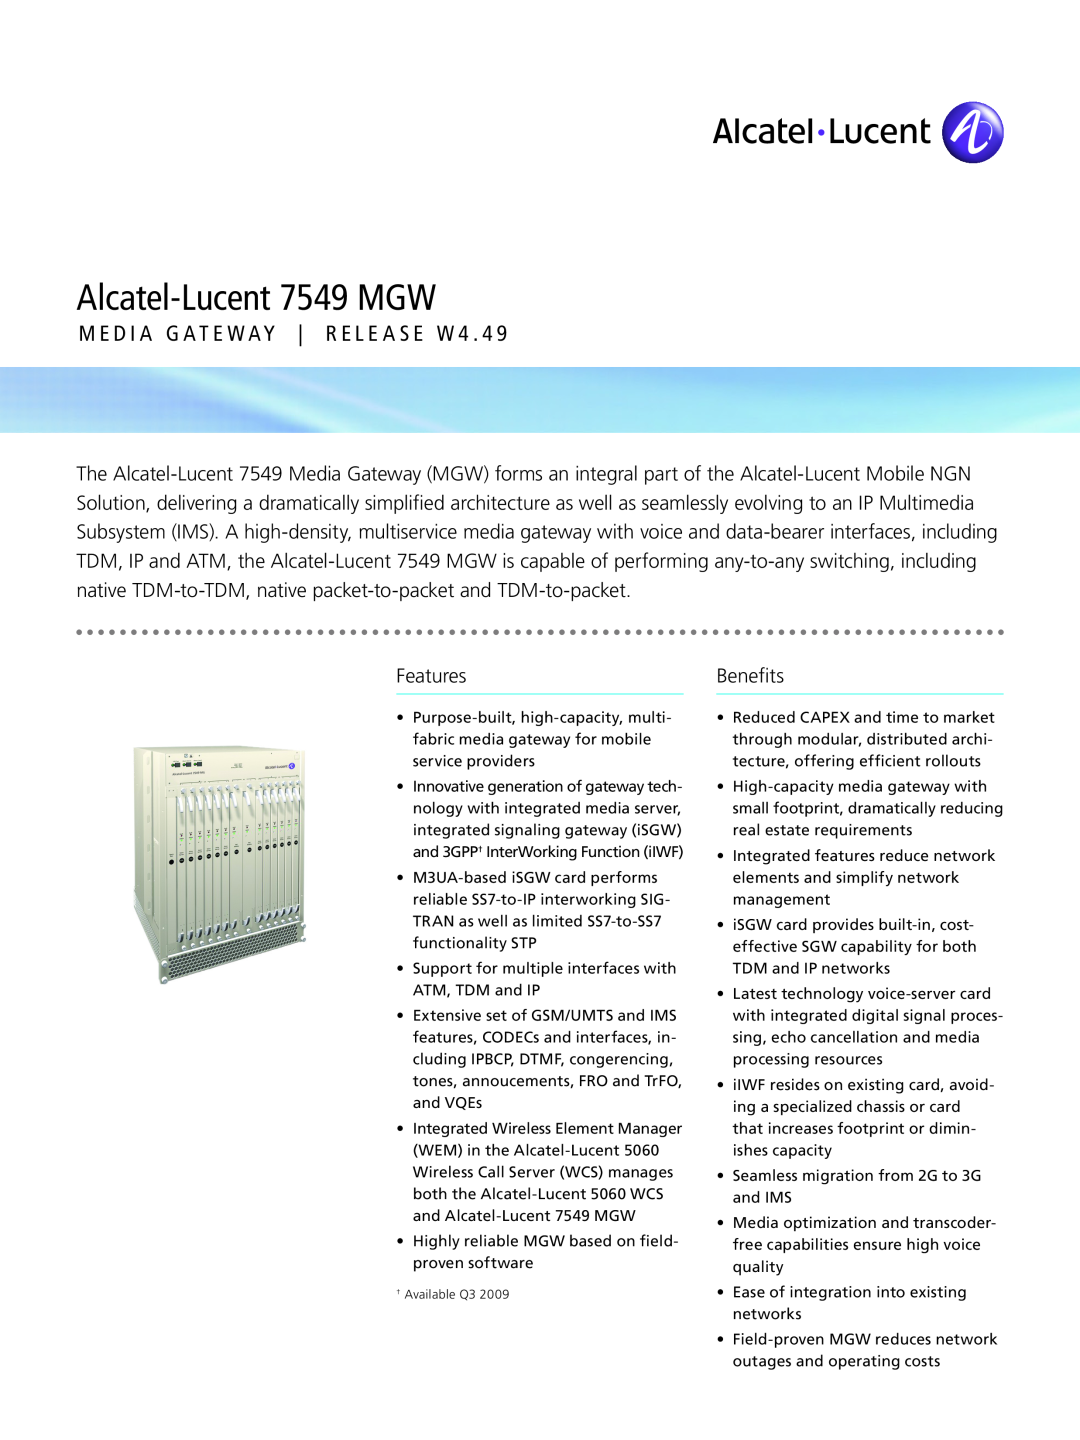 Alcatel-Lucent manual Features, Benefits, Alcatel-Lucent 7549 MGW, M e d i a G a t e w a y R e l e a s e W 4 . 4 